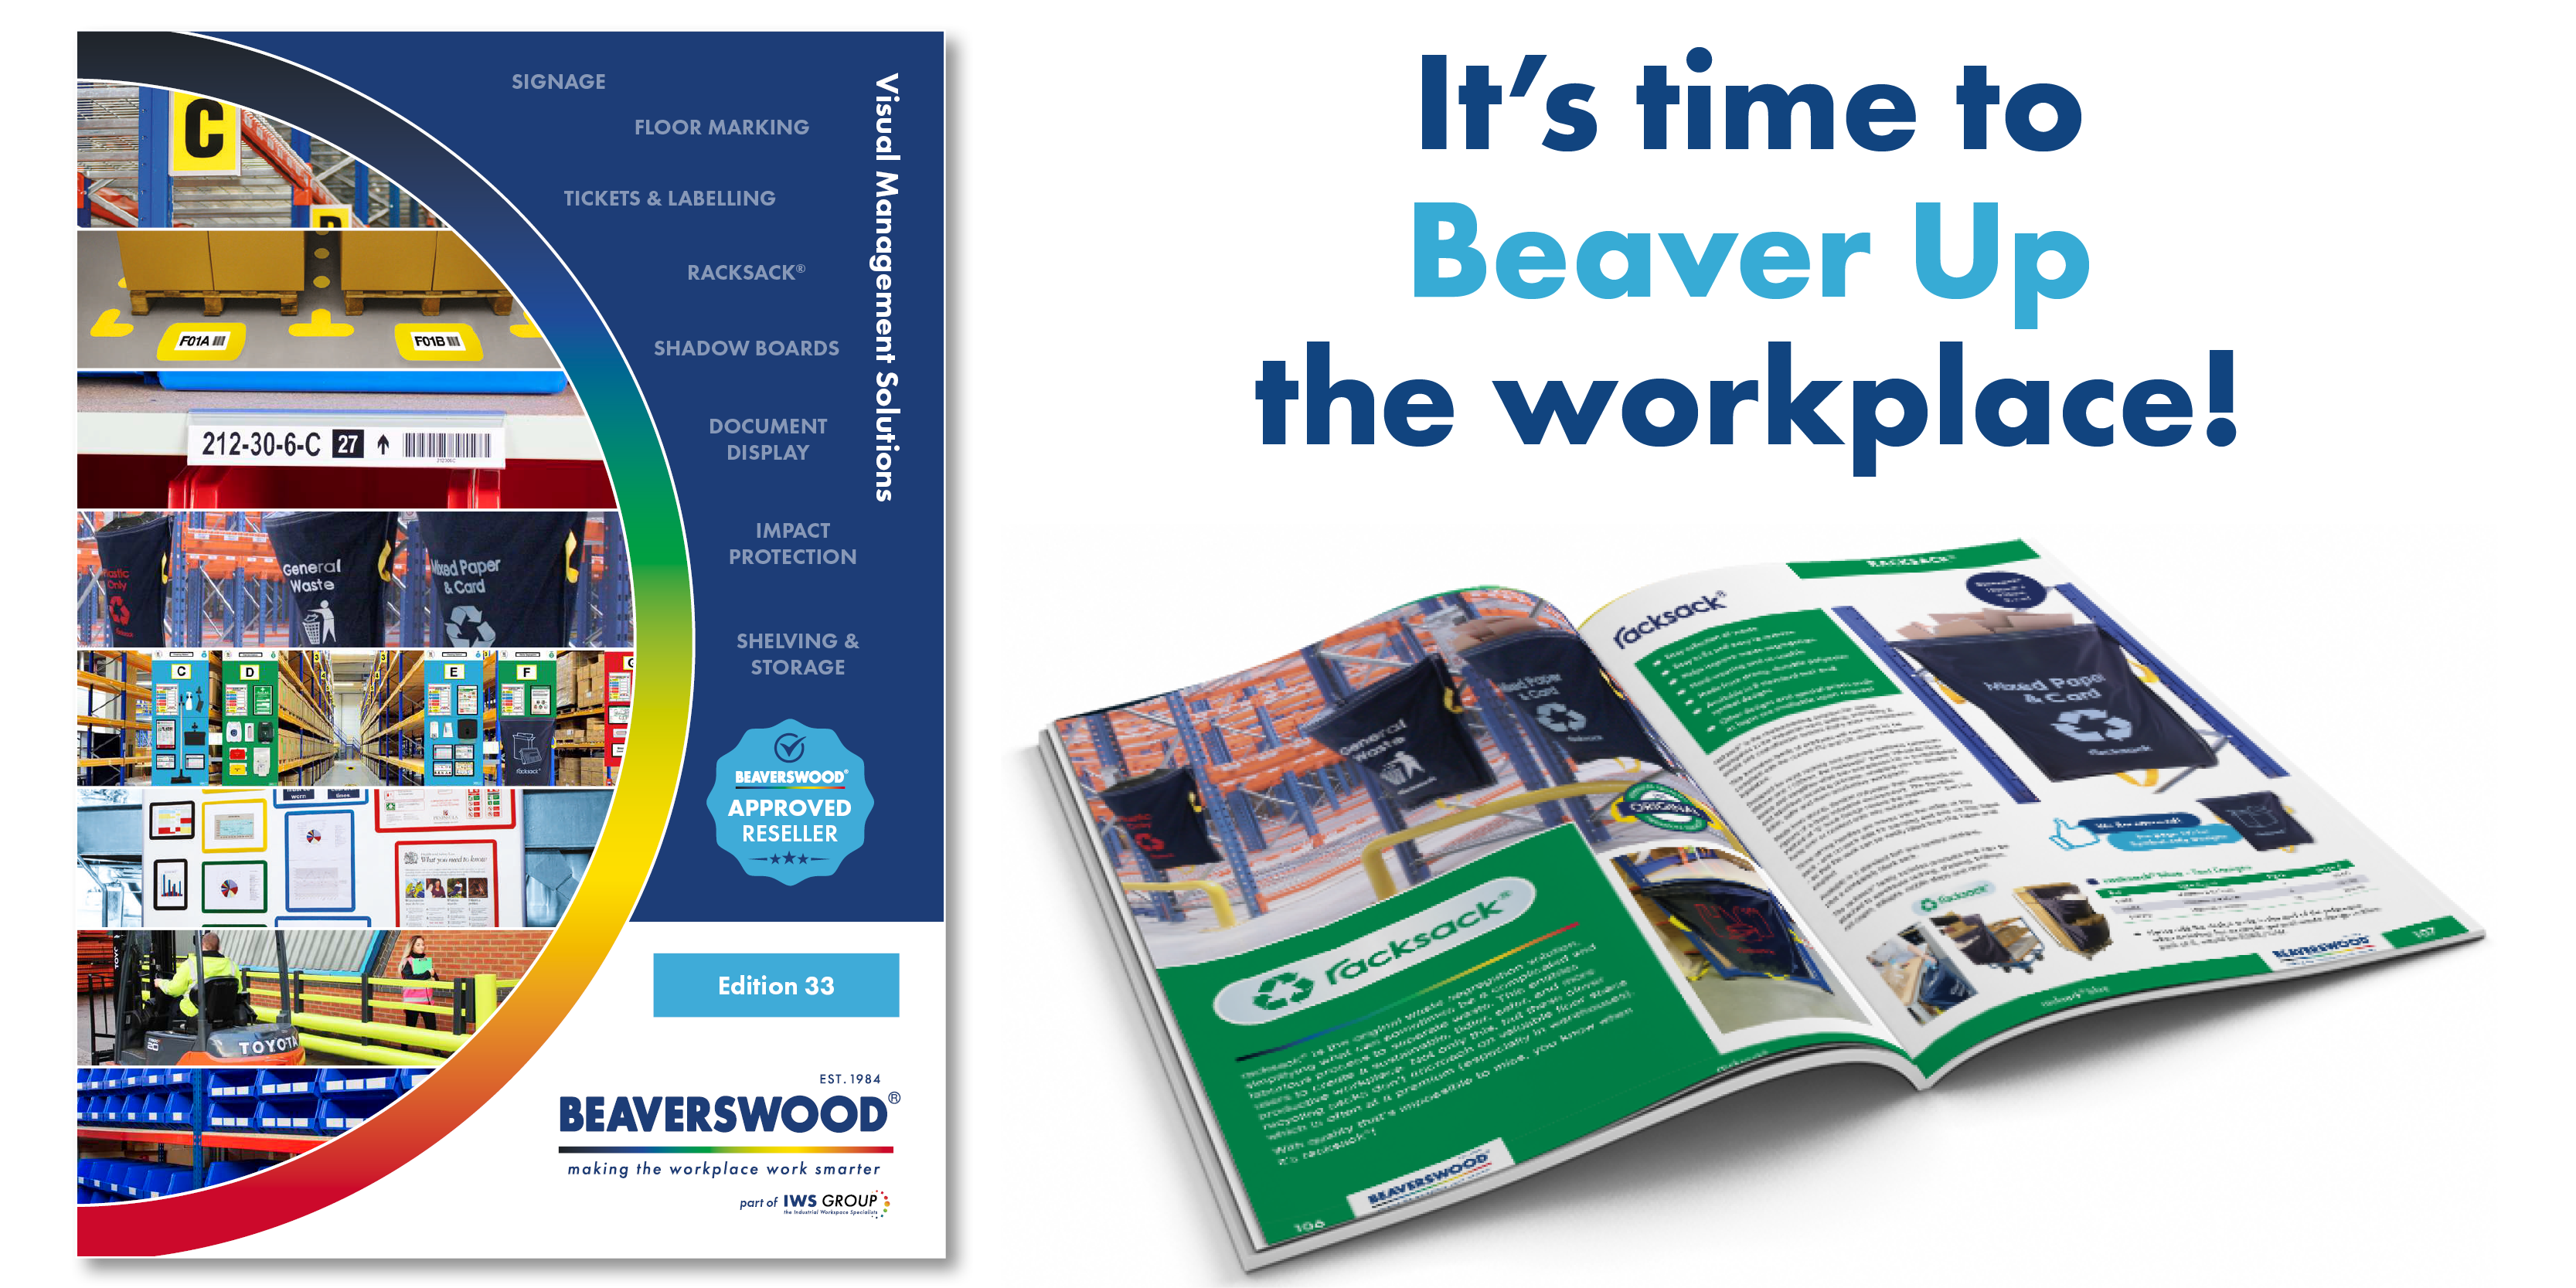 Request a Beaverswood Catalogue